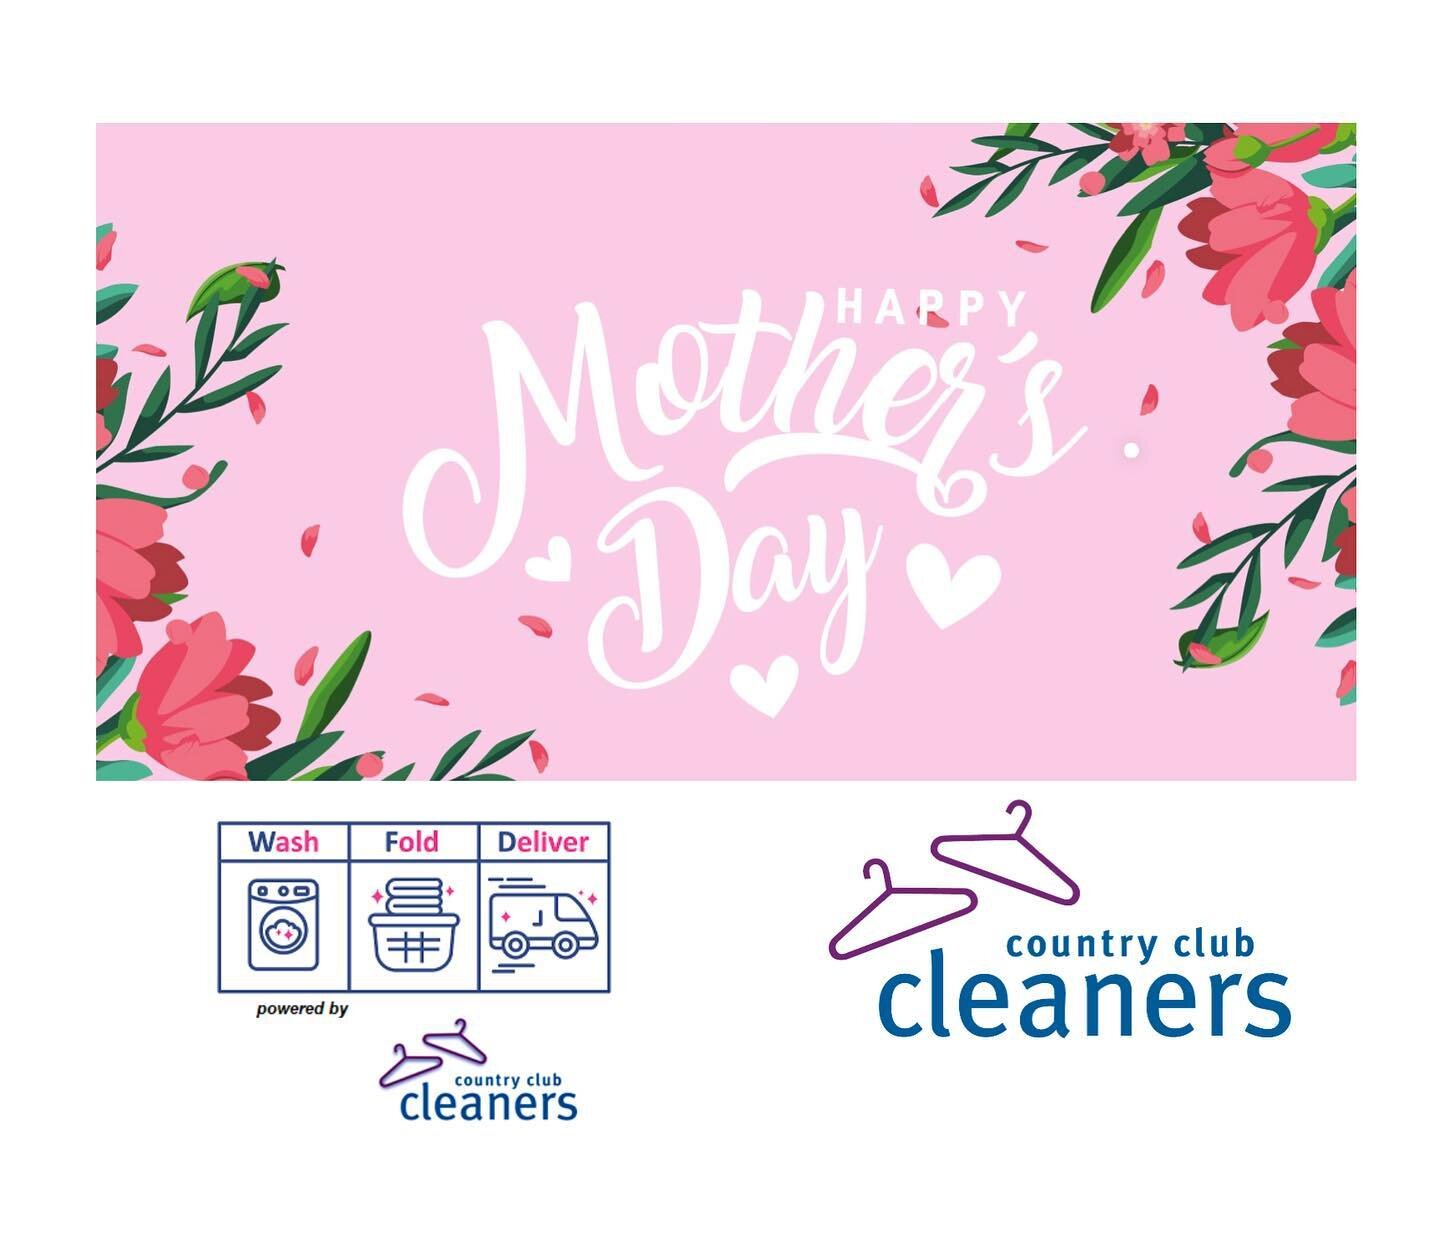 Happy Mother&rsquo;s Day from Country Club Cleaners and Wash, Fold, Deliver CA.